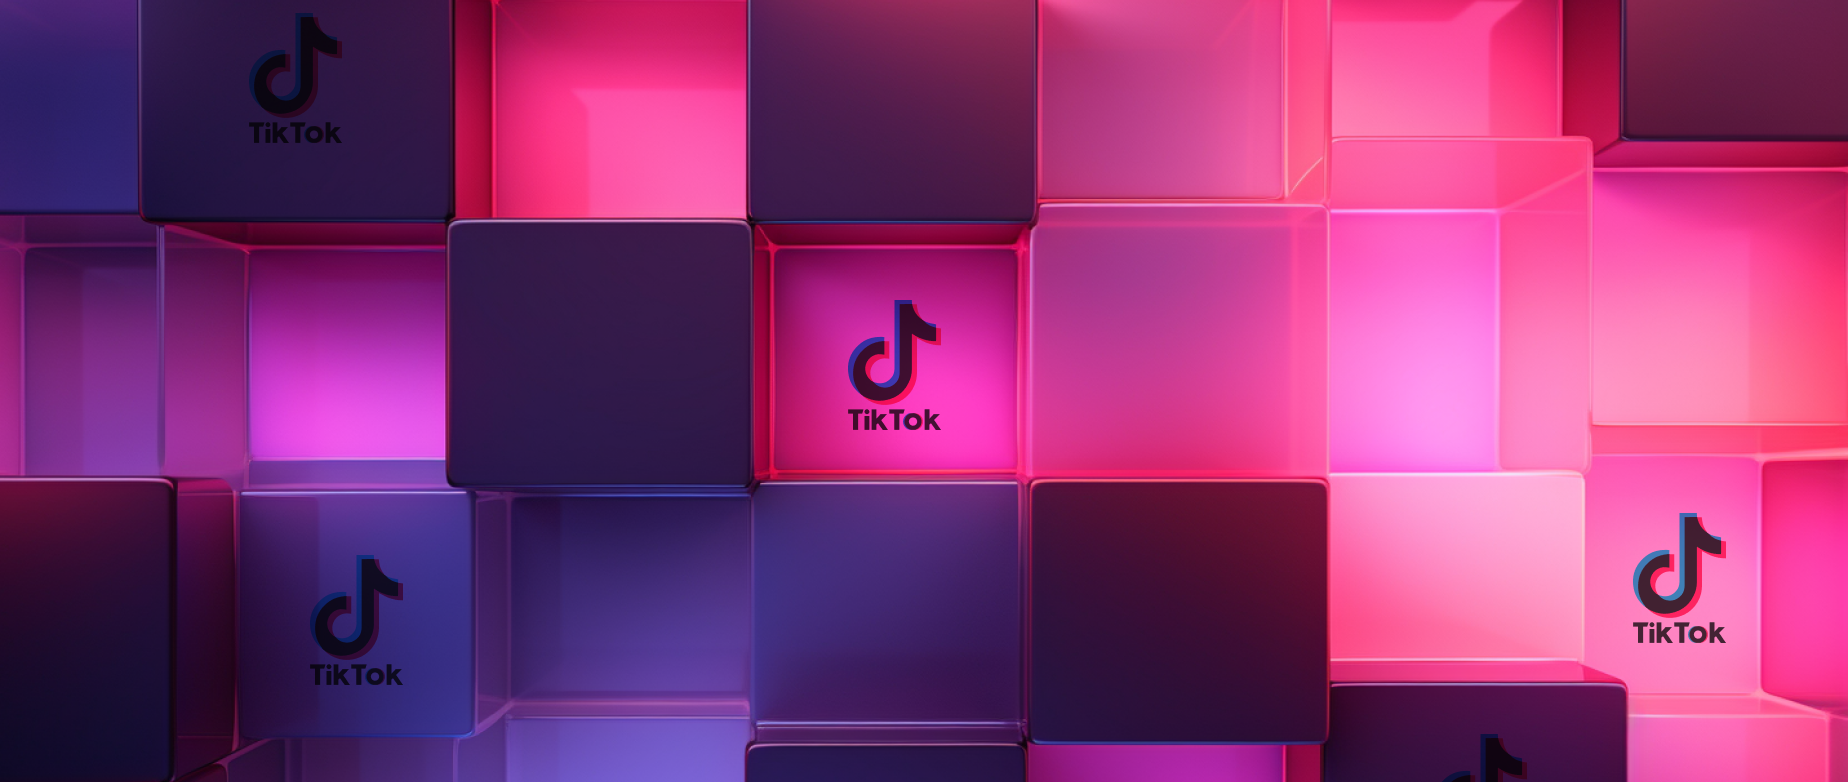 three rows of repeating cubes, some of which have the TikTok logo on them: tiktok influencer marketing